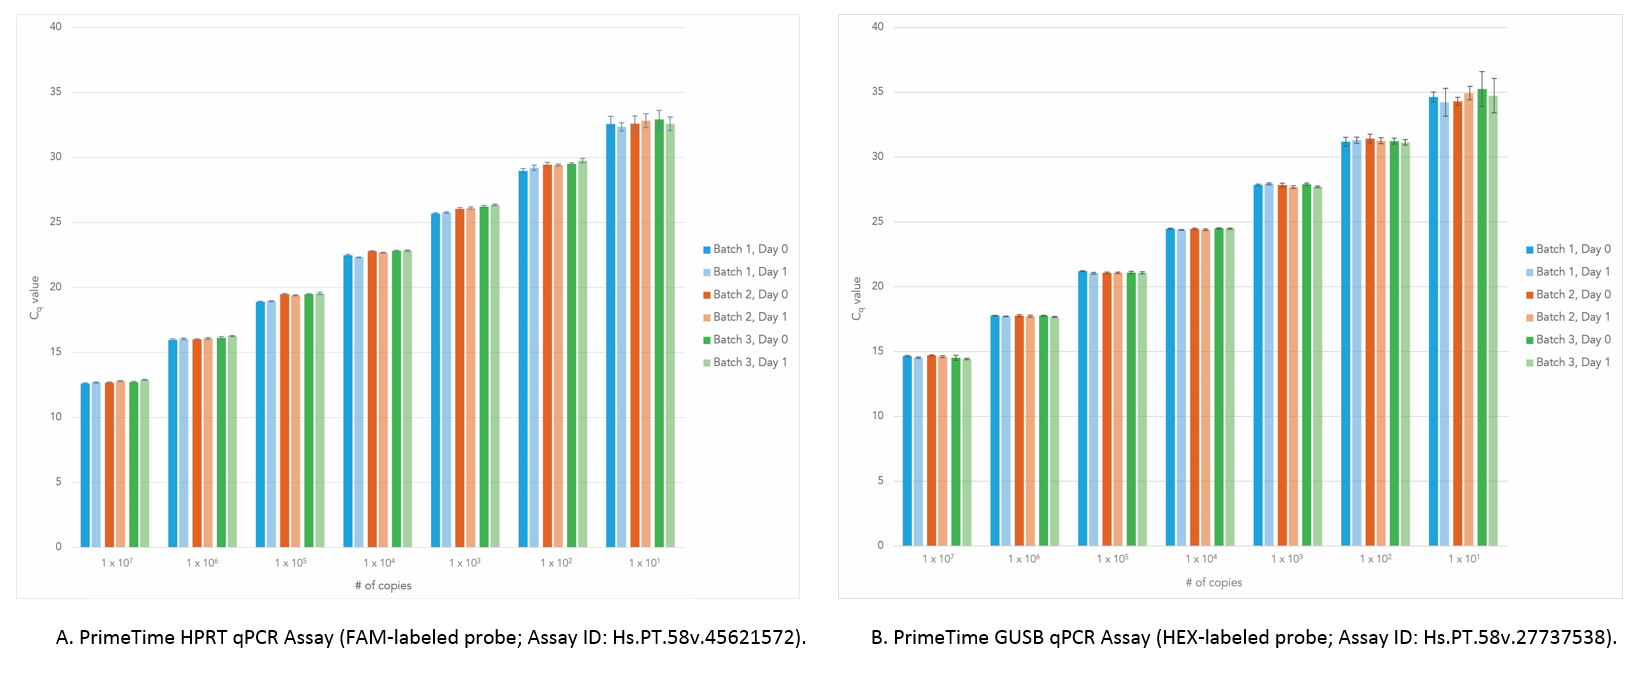 Histograms showing the Cq values on the x axis of the number of copies for different batches of PrimeTime HPRT qPCR Assay, FAM-labeled in the left chart and PrimeTime GUSB qPCR Assay, HEX-labeled in the right chart.